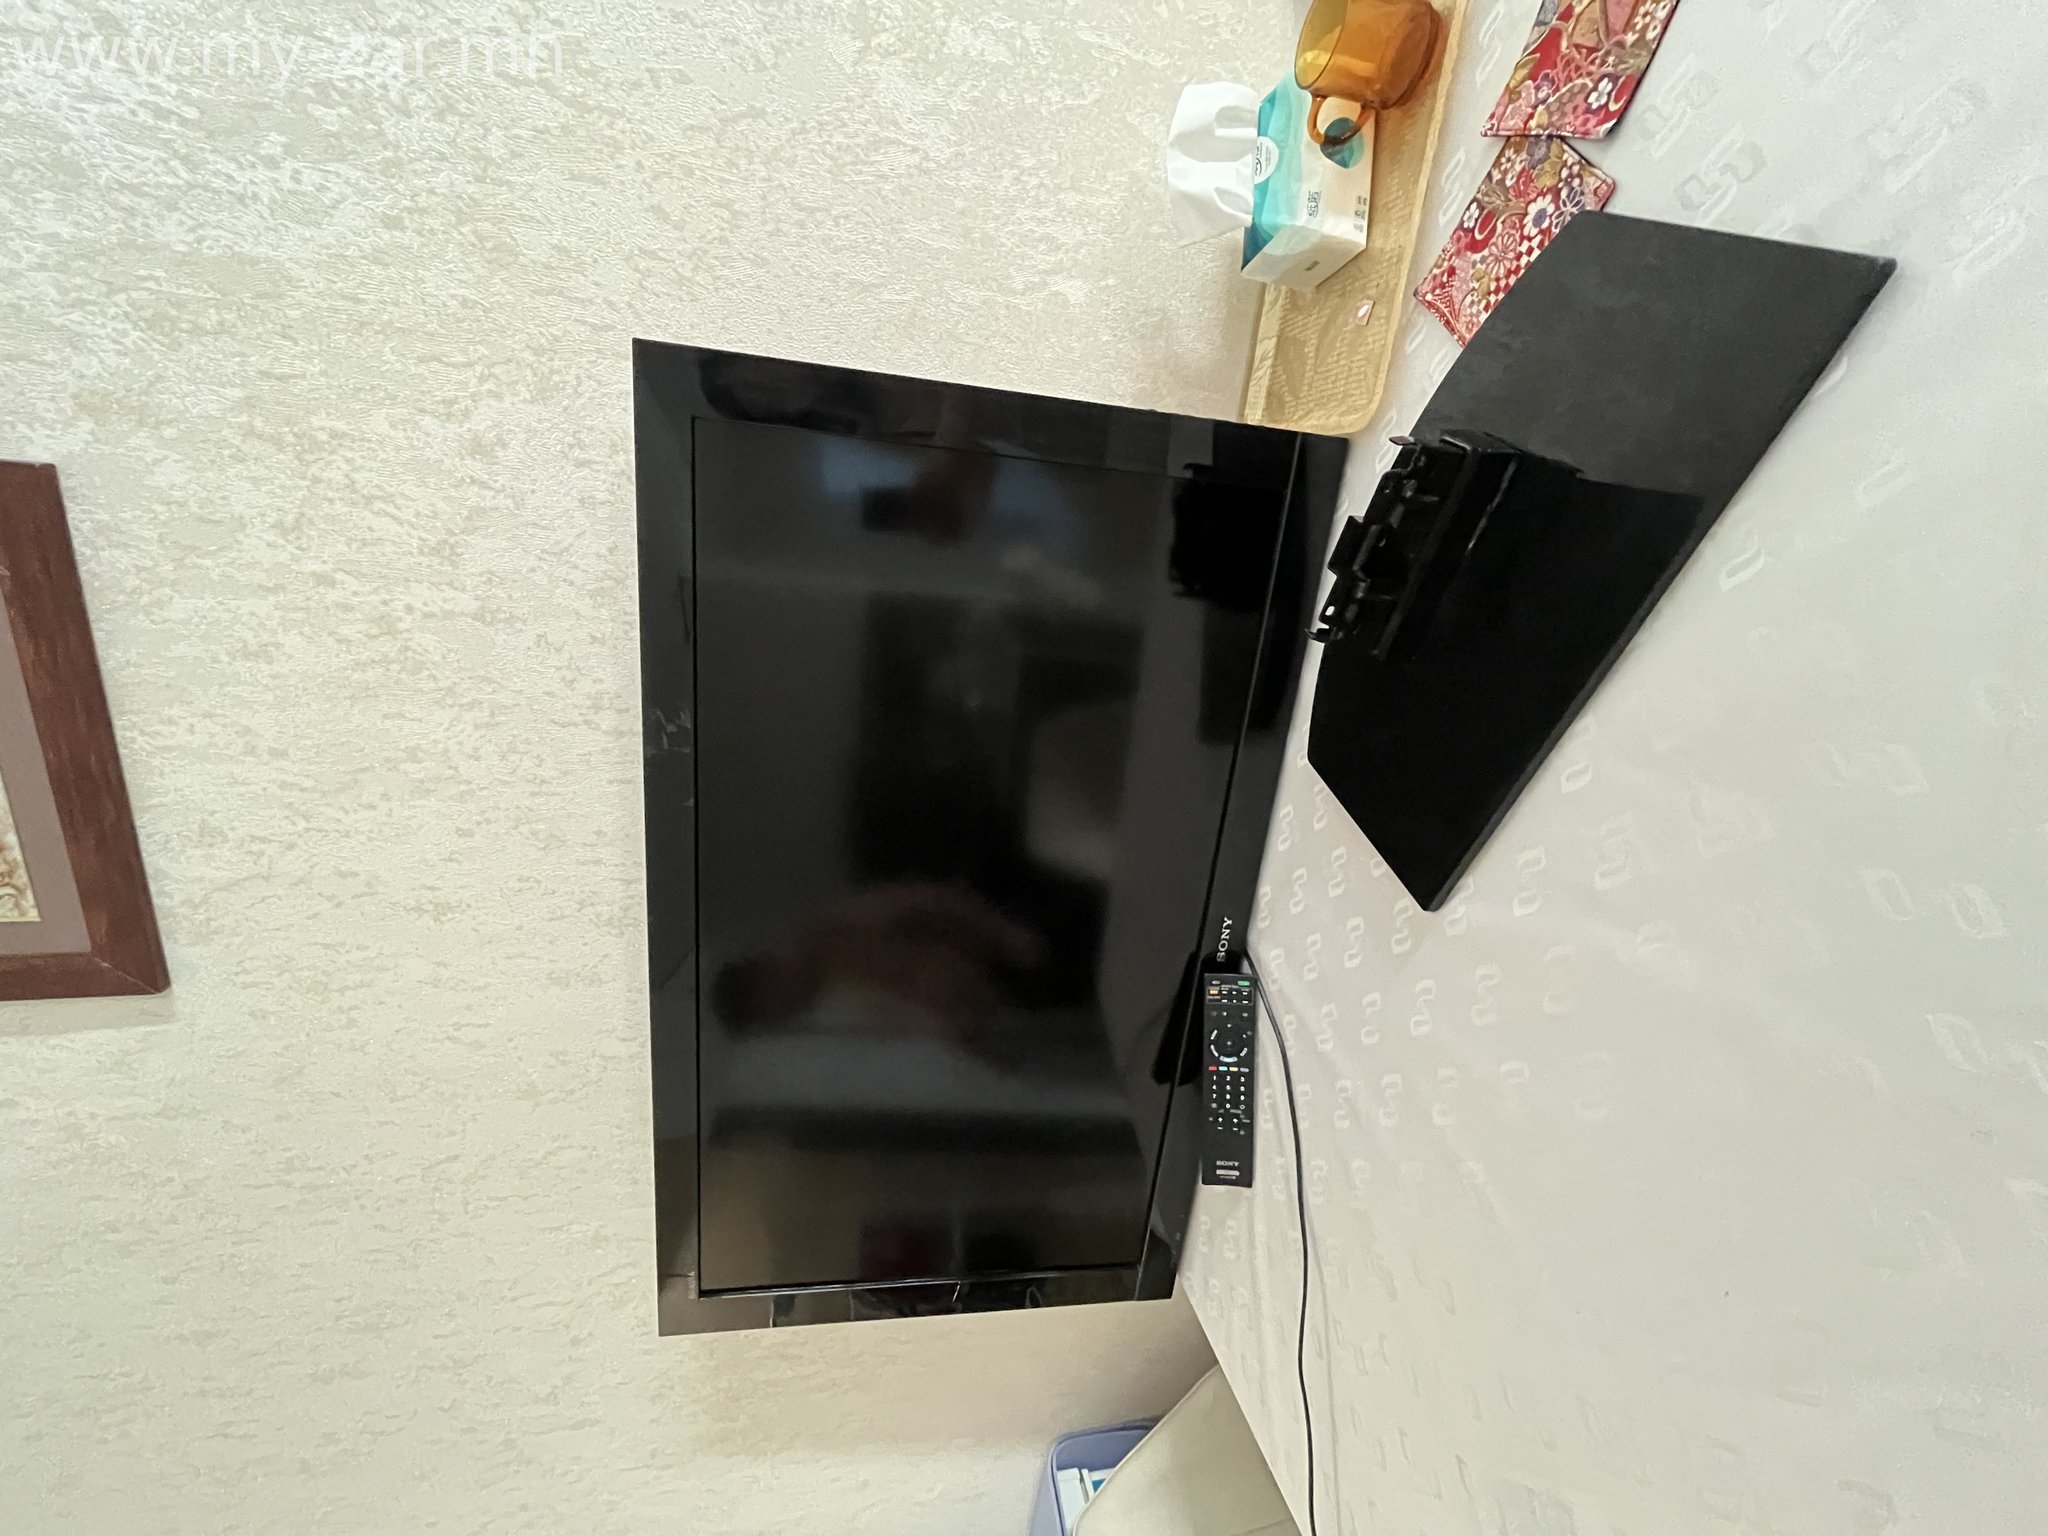 Sony 42 inch and xbox зарна